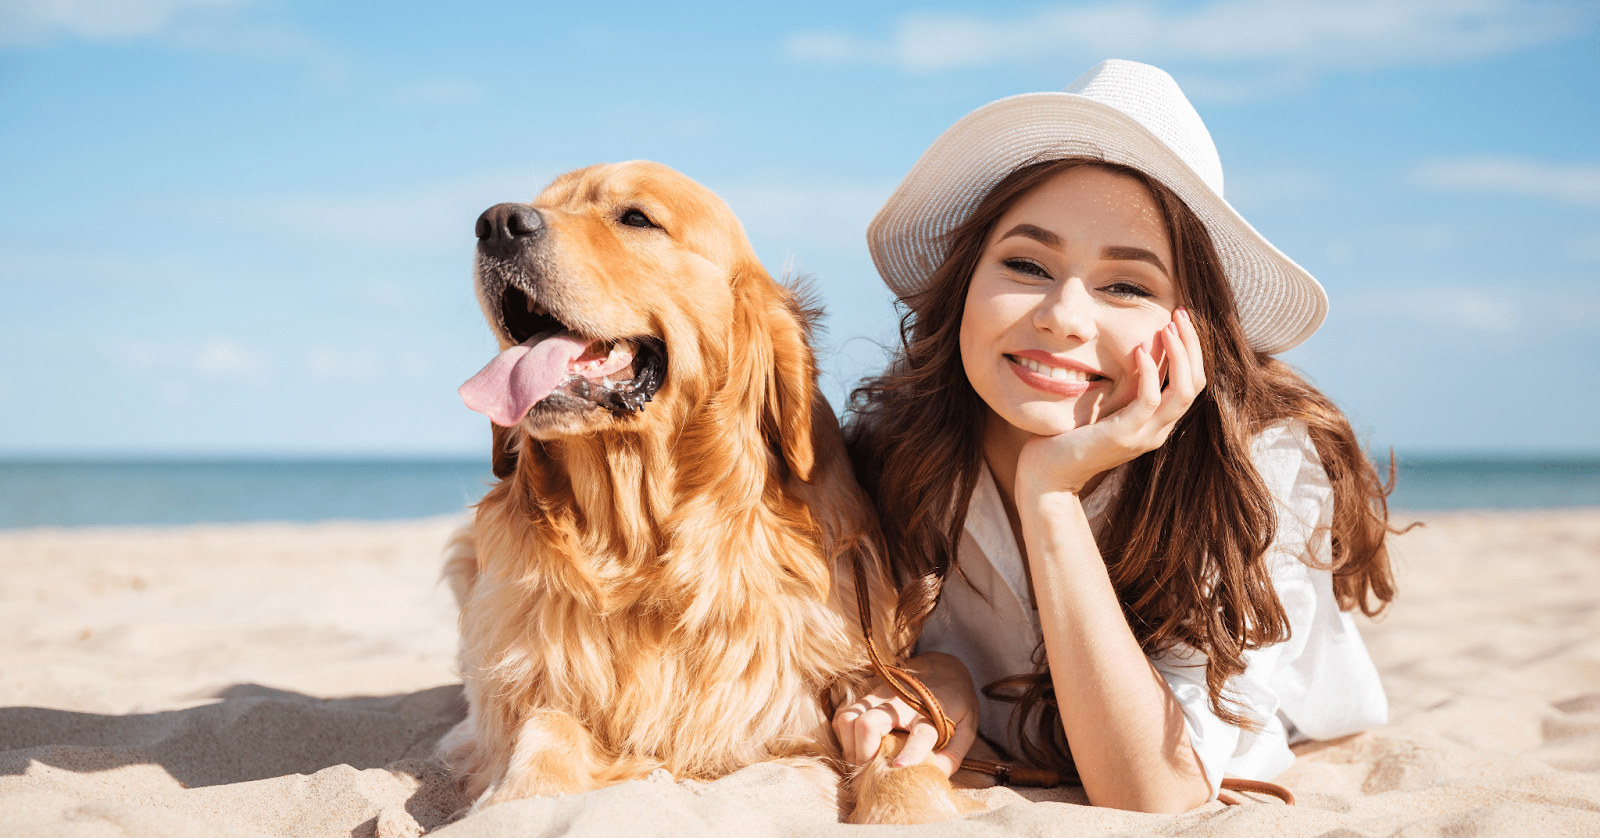 happy dog on beach with woman in sun hat